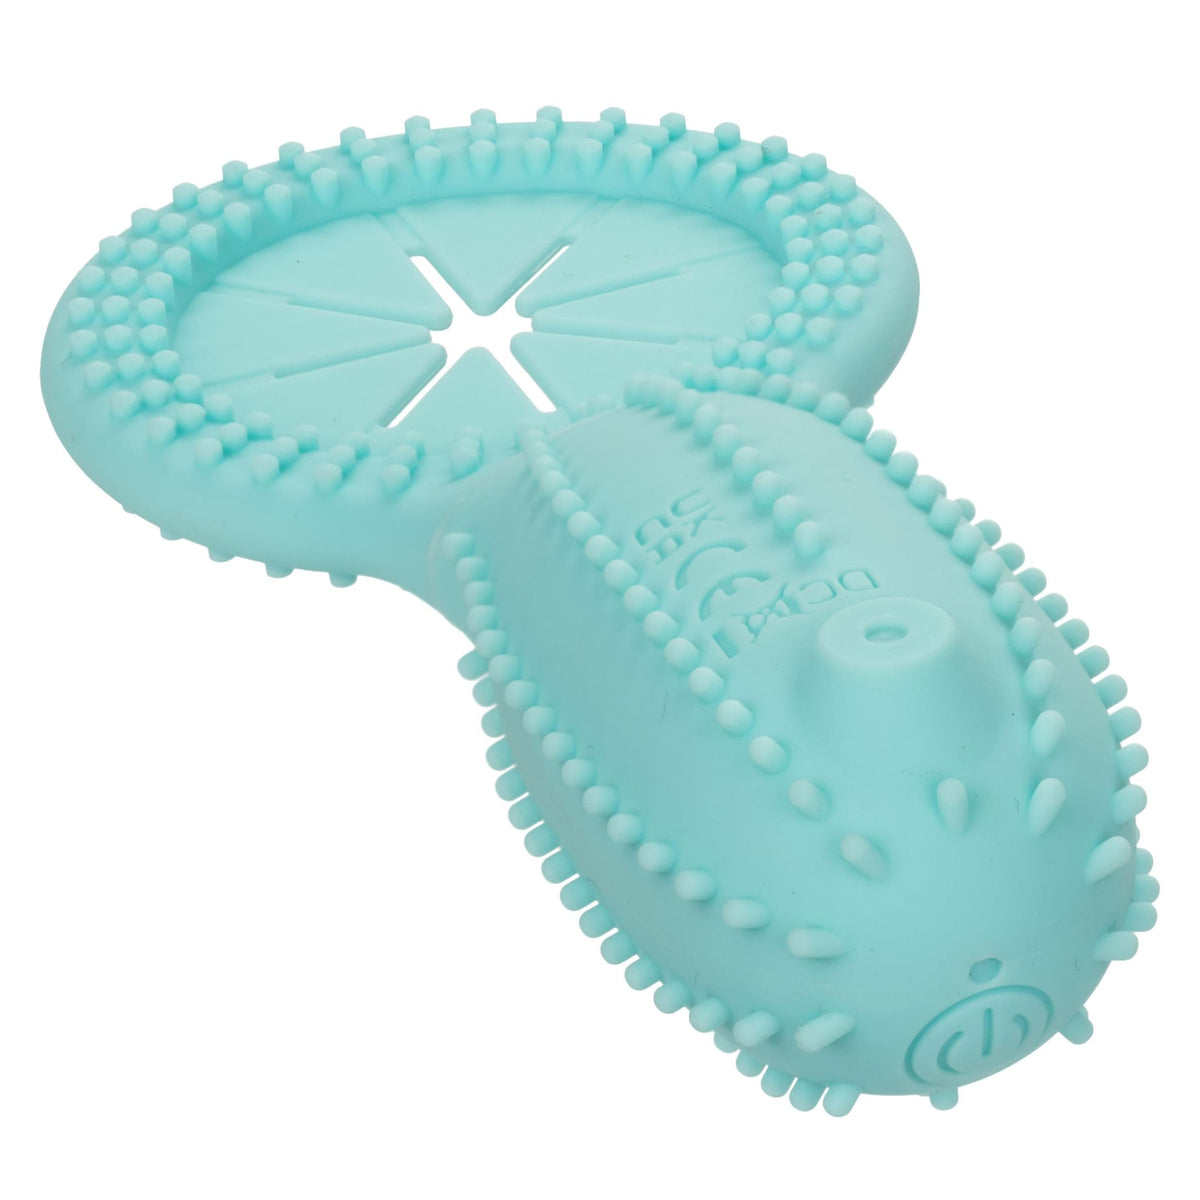 silicone rechargeable elite 12x enhancer teal